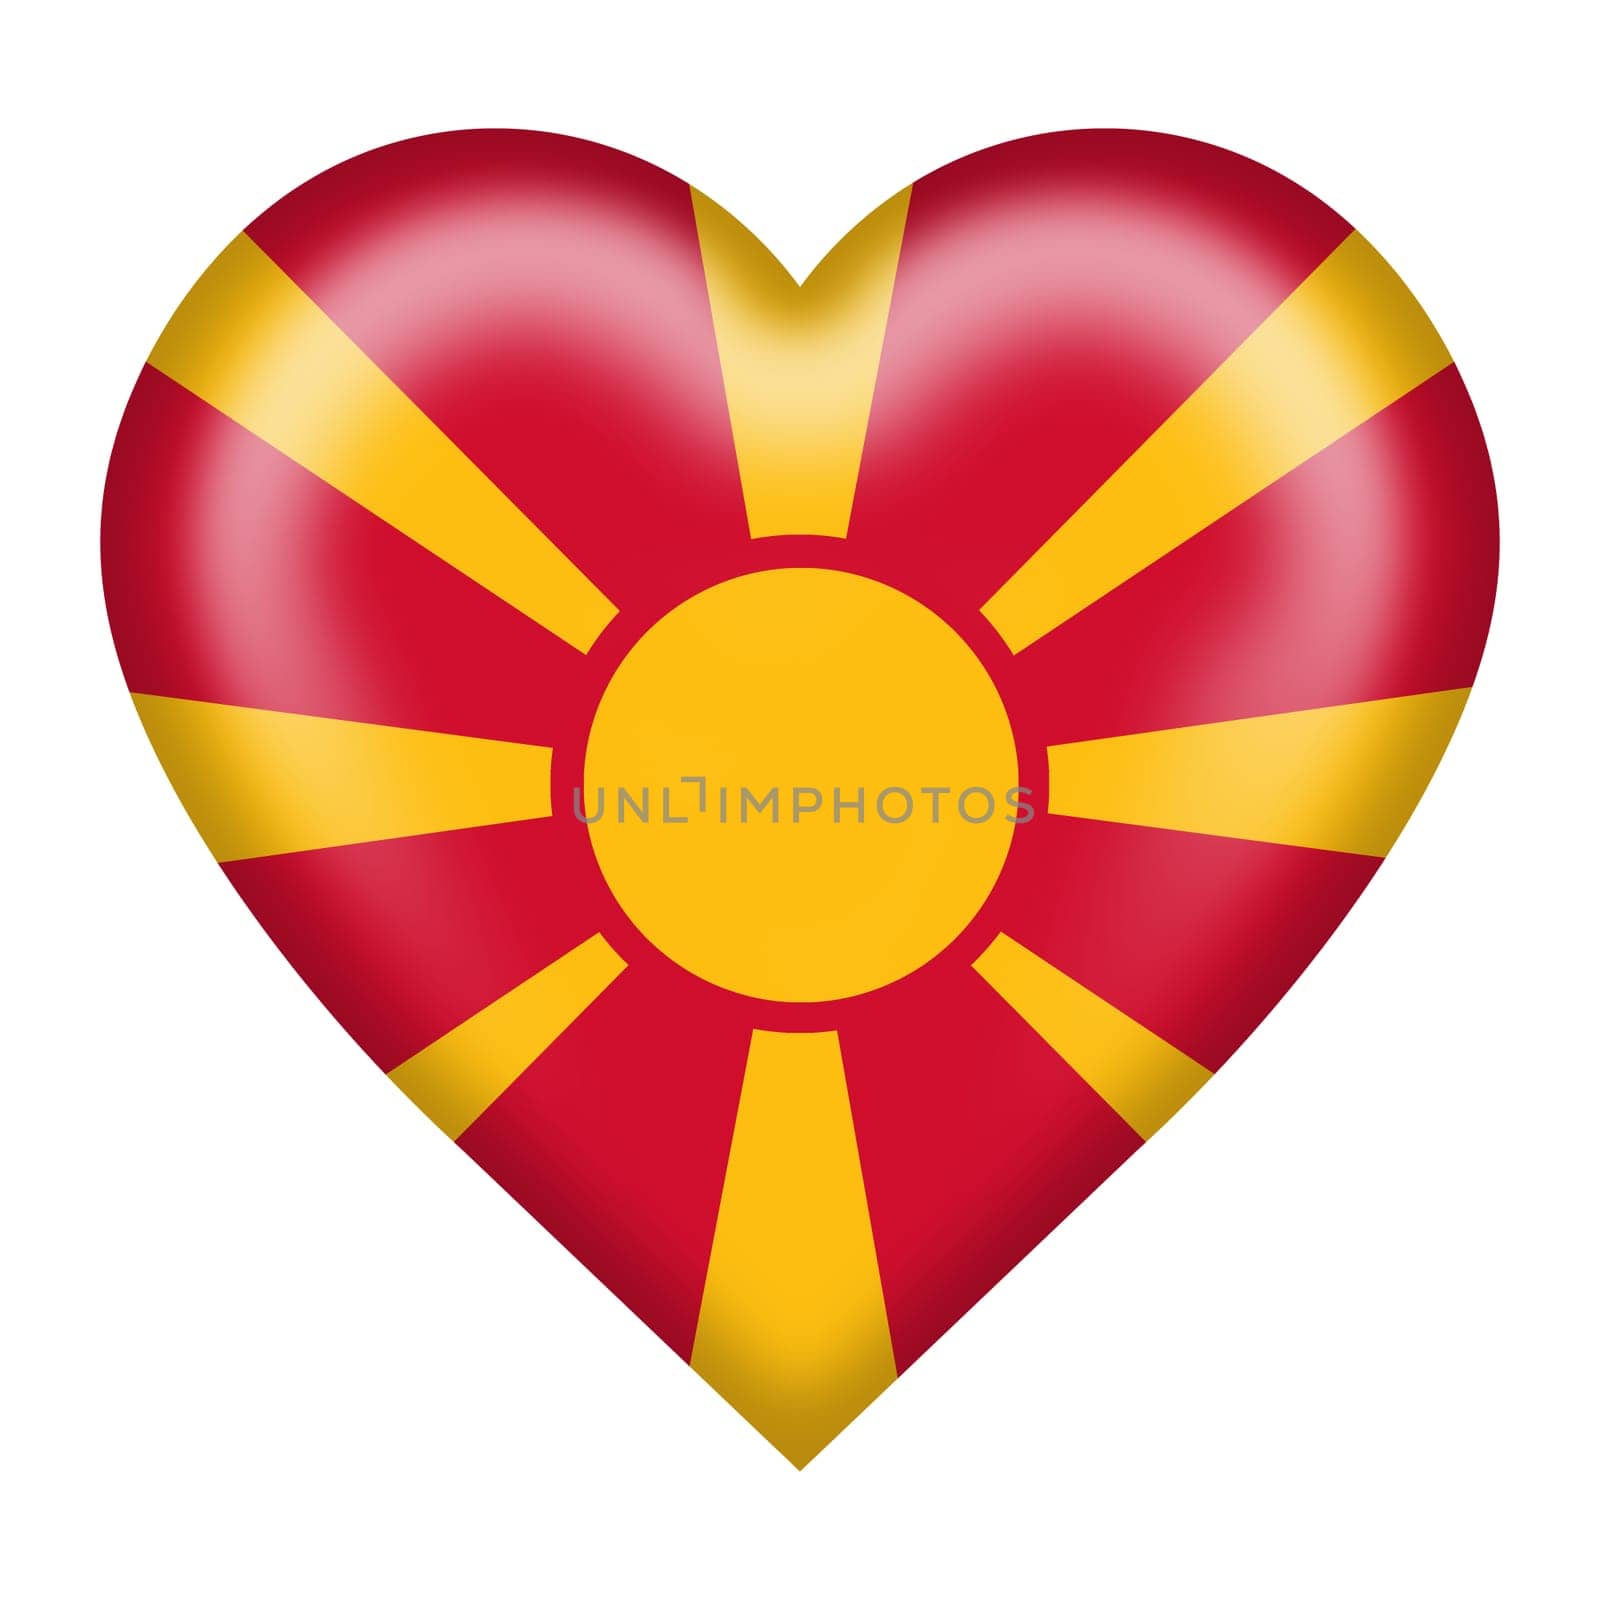 A Macedonia flag heart button isolated on white with clipping path 3d illustration